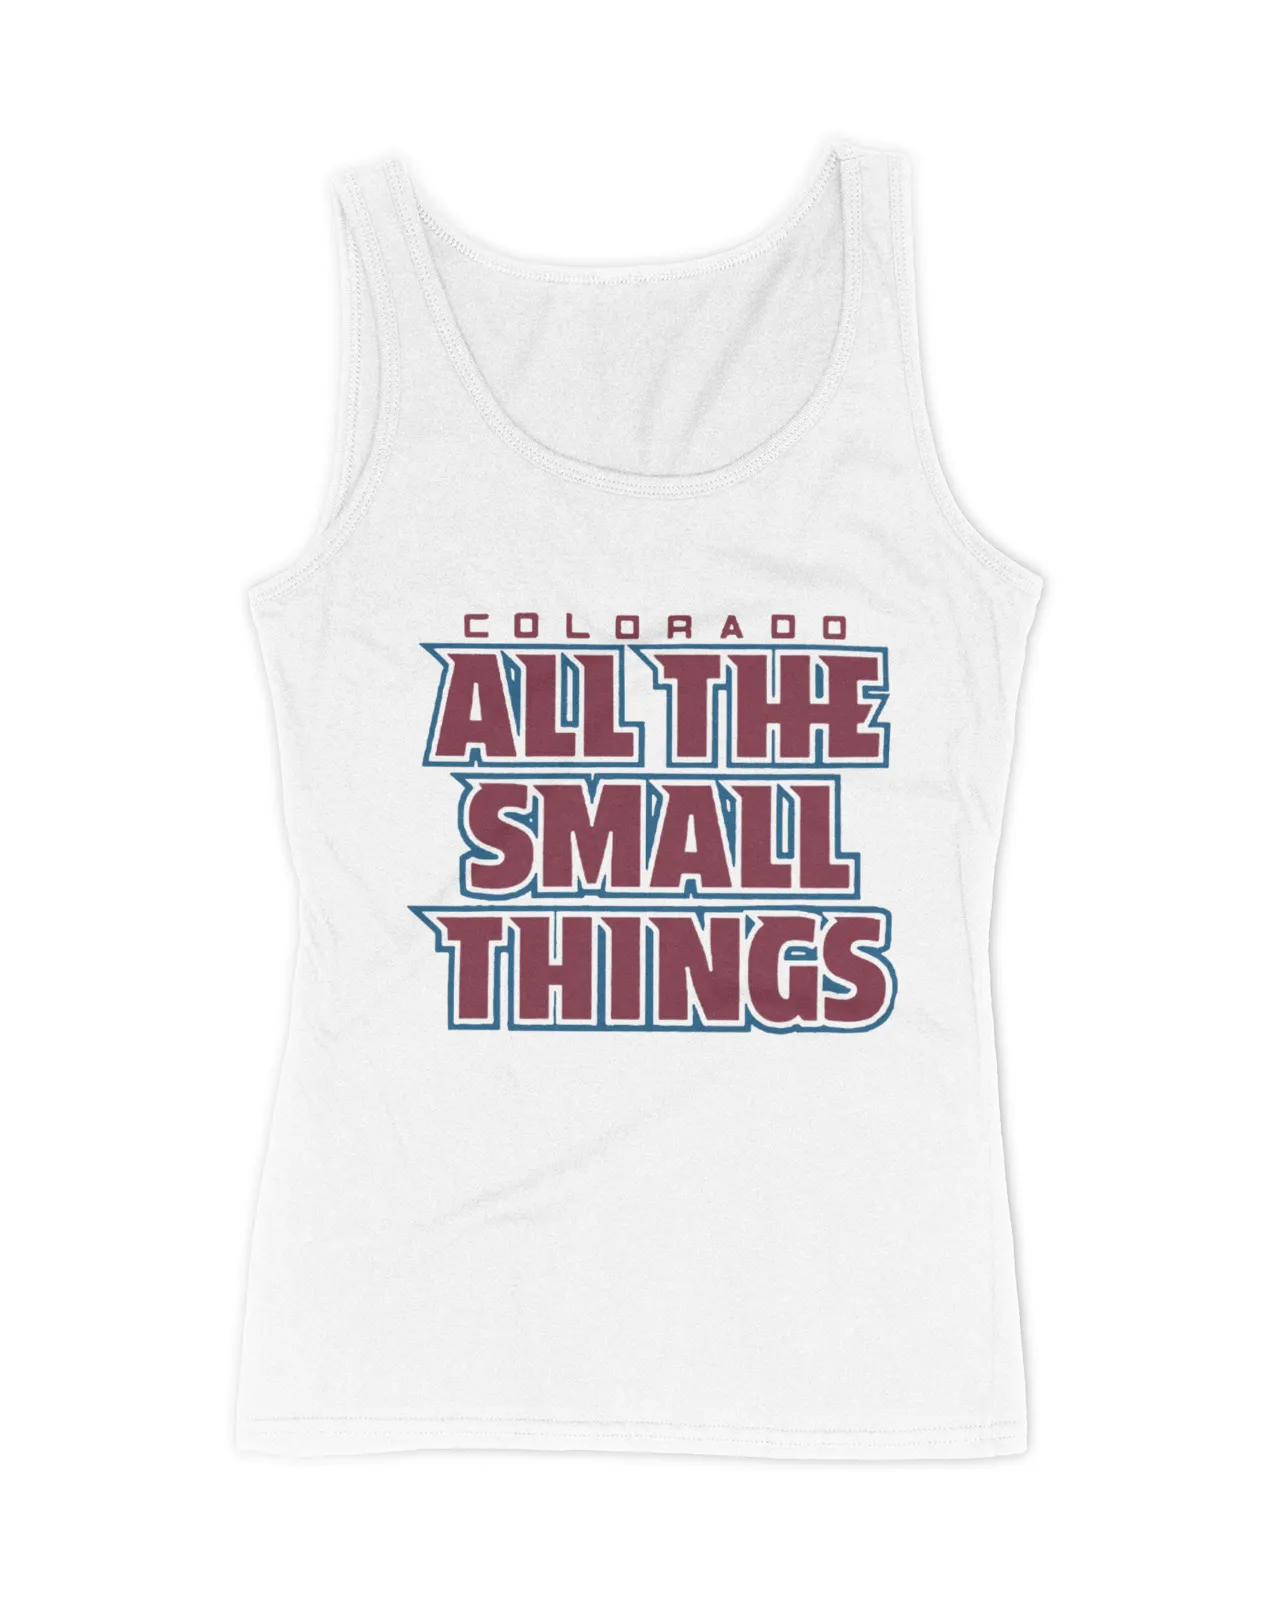 All The Small Things Avalanche Shirt